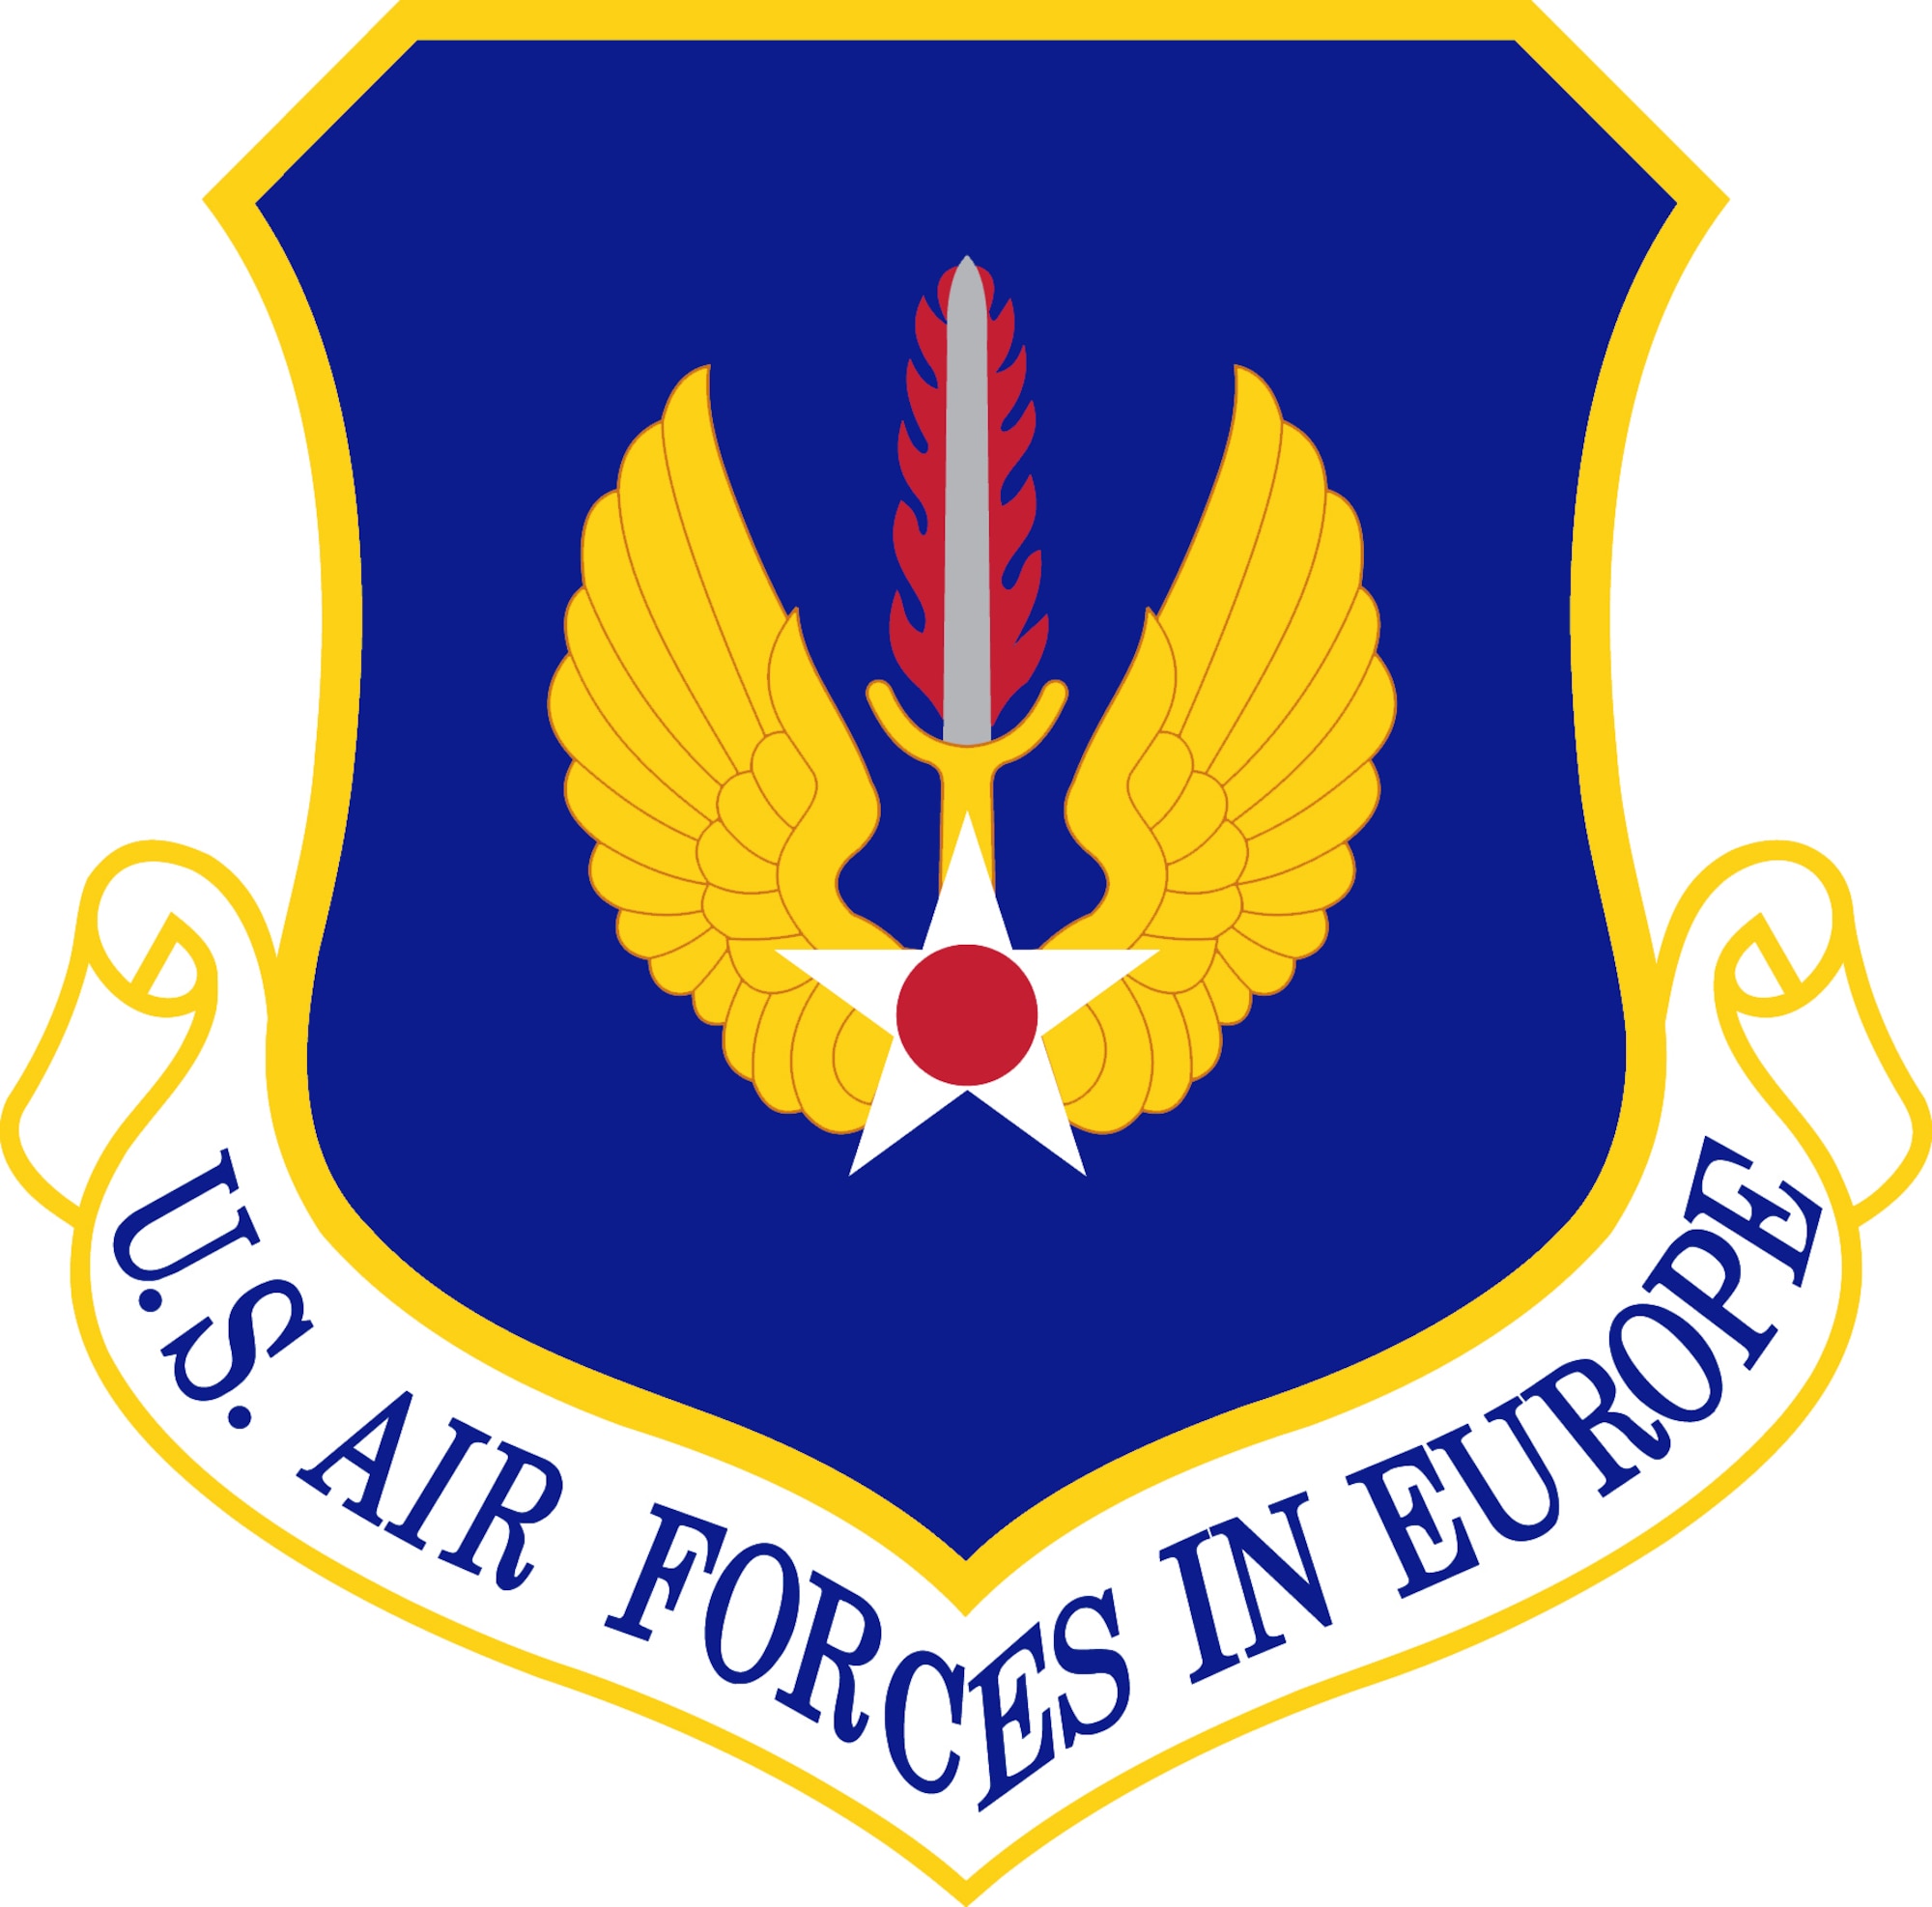 U.S. Air Forces in Europe Shield (Color). Image provided by the Air Force Historical Research Agency. In accordance with Chapter 3 of AFI 84-105, commercial reproduction of this emblem is NOT permitted without the permission of the proponent organizational/unit commander. The image is 6x6 inches @ 300 ppi